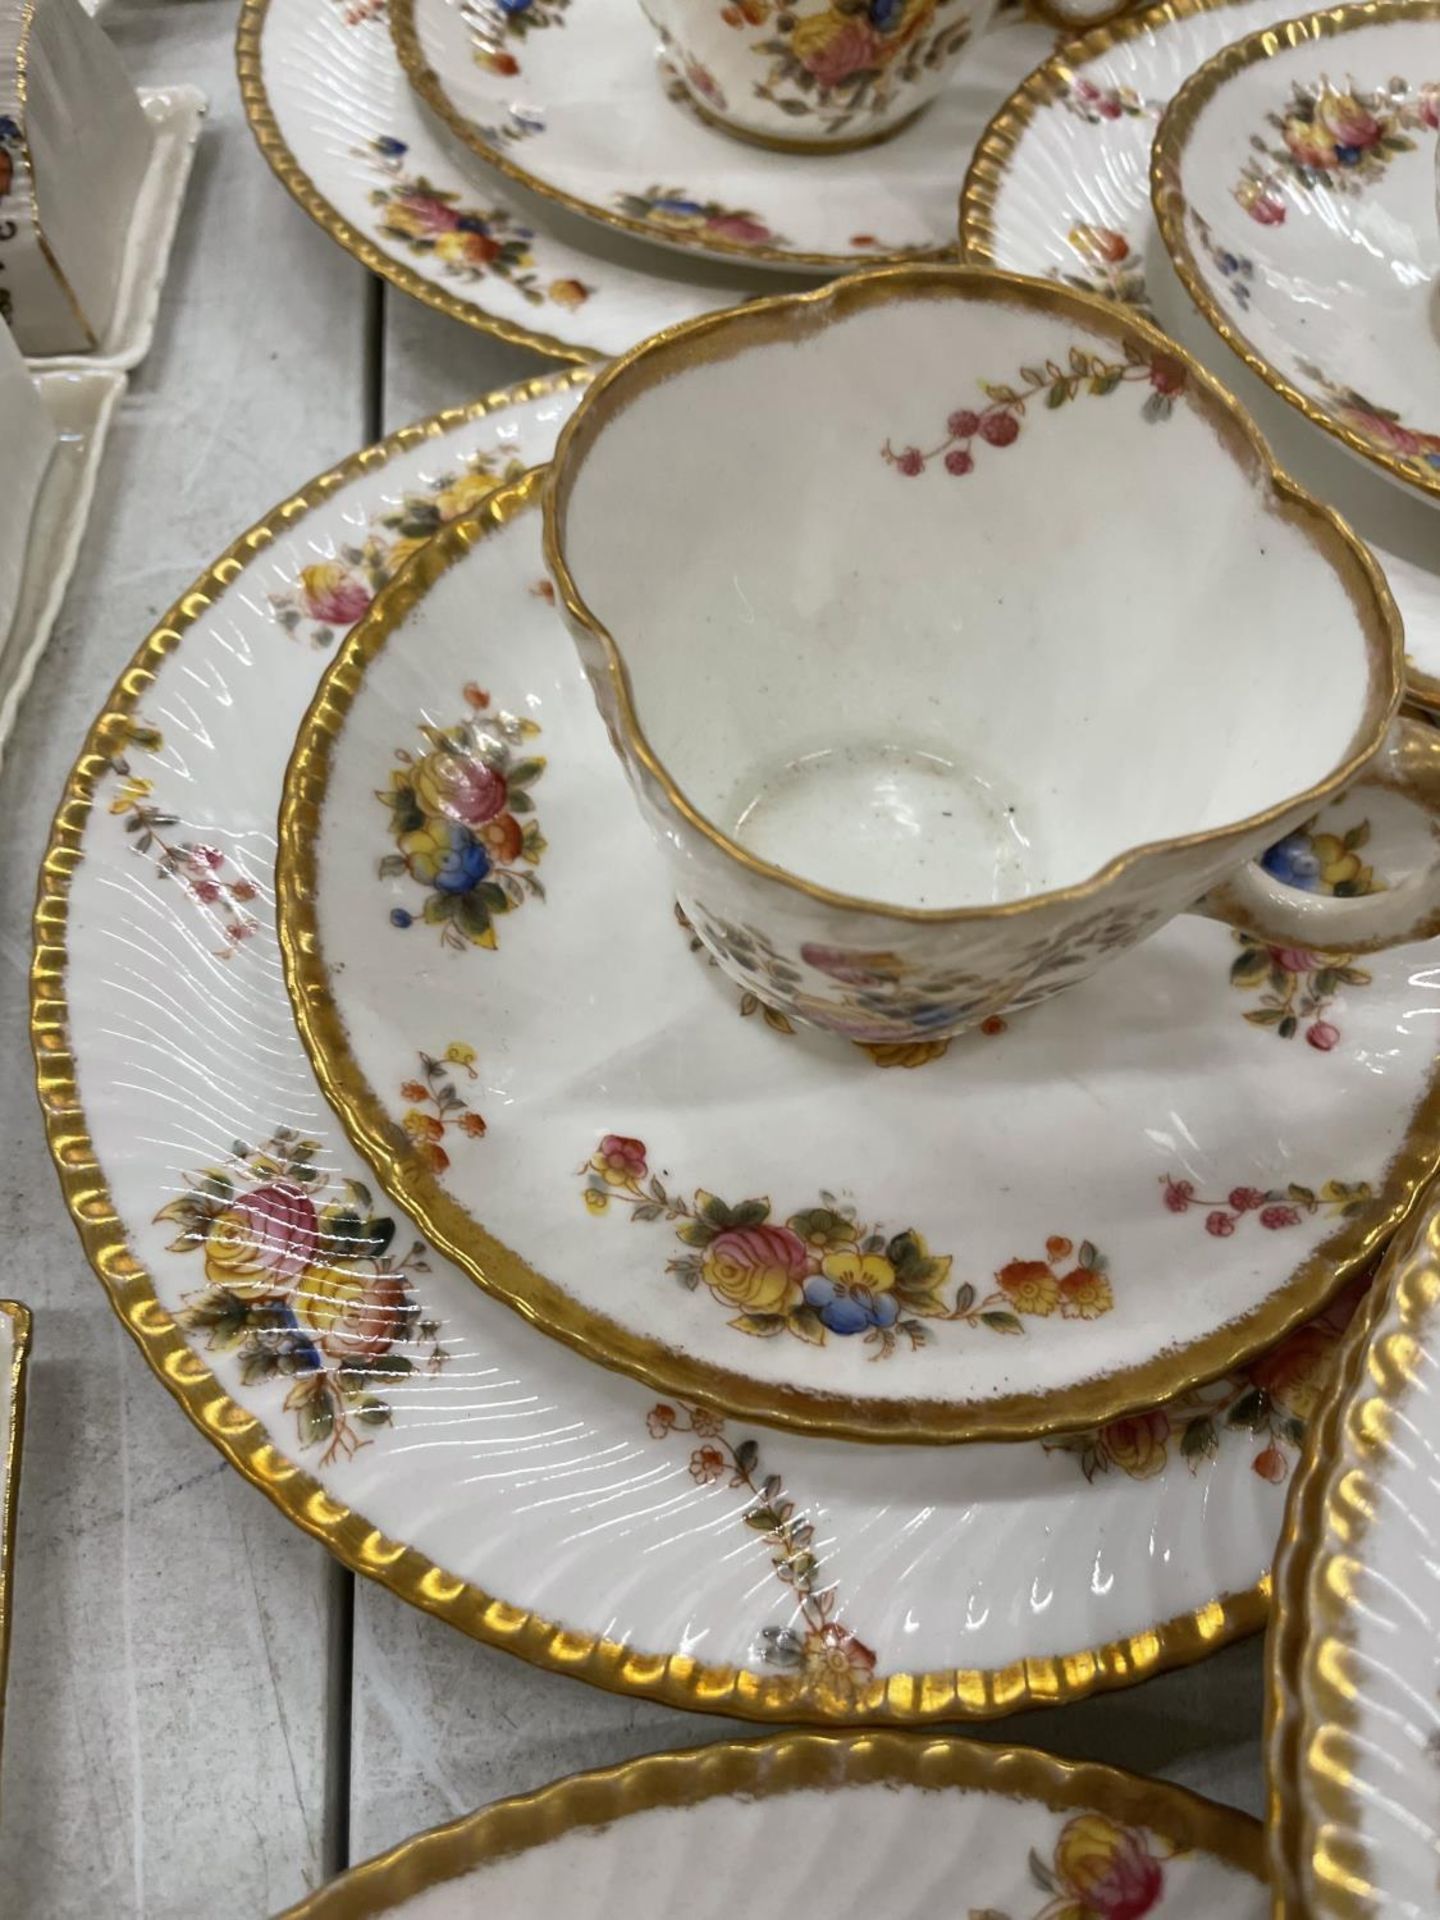 A COLLECTION OF CIRCA LATE 1800'S/EARLY 19TH CENTURY CHINA CUPS, SAUCERS AND PLATES DECORATED WITH - Image 4 of 6